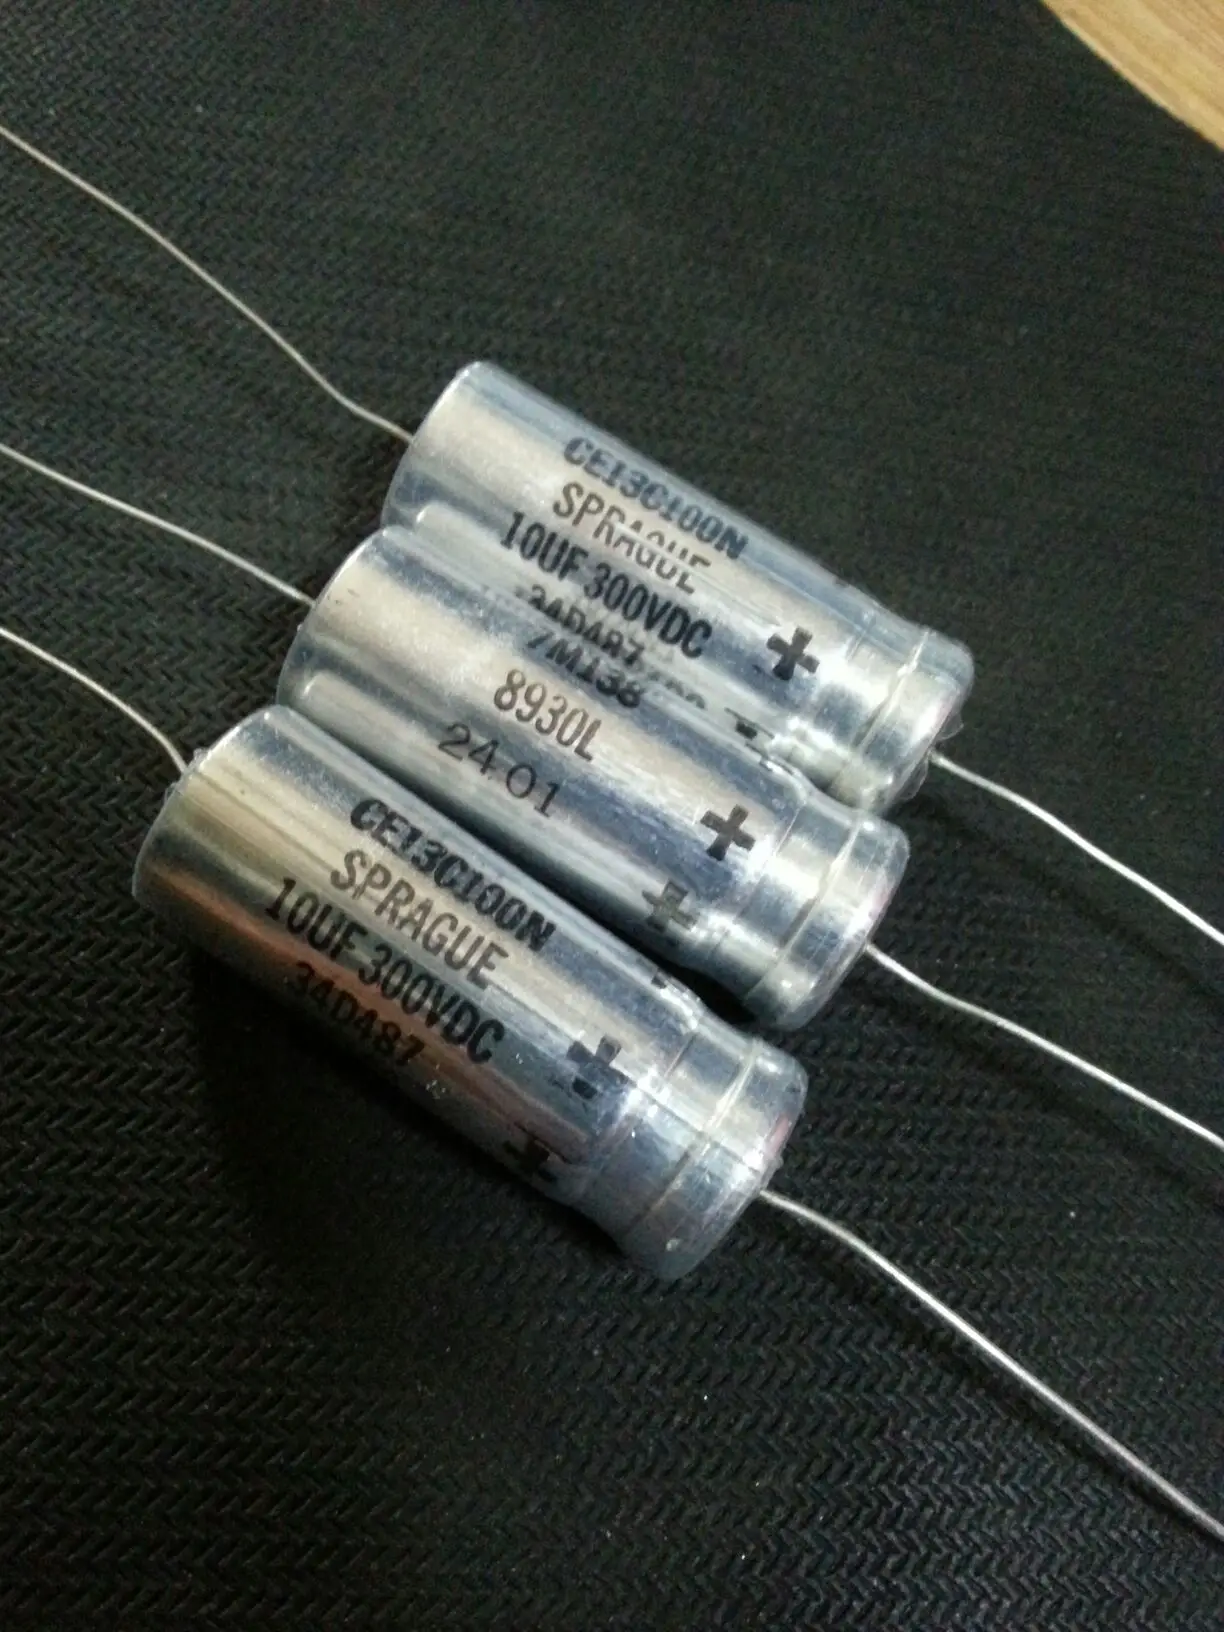 10pcs/30pcs American antique electrolytic capacitor SPRAGUE 10UF 300V 34D full copper foot free shipping 10pcs half round 15 5cm handbag clutch frame antique silver metal frame kiss clasp bag purse handle parts for sewing